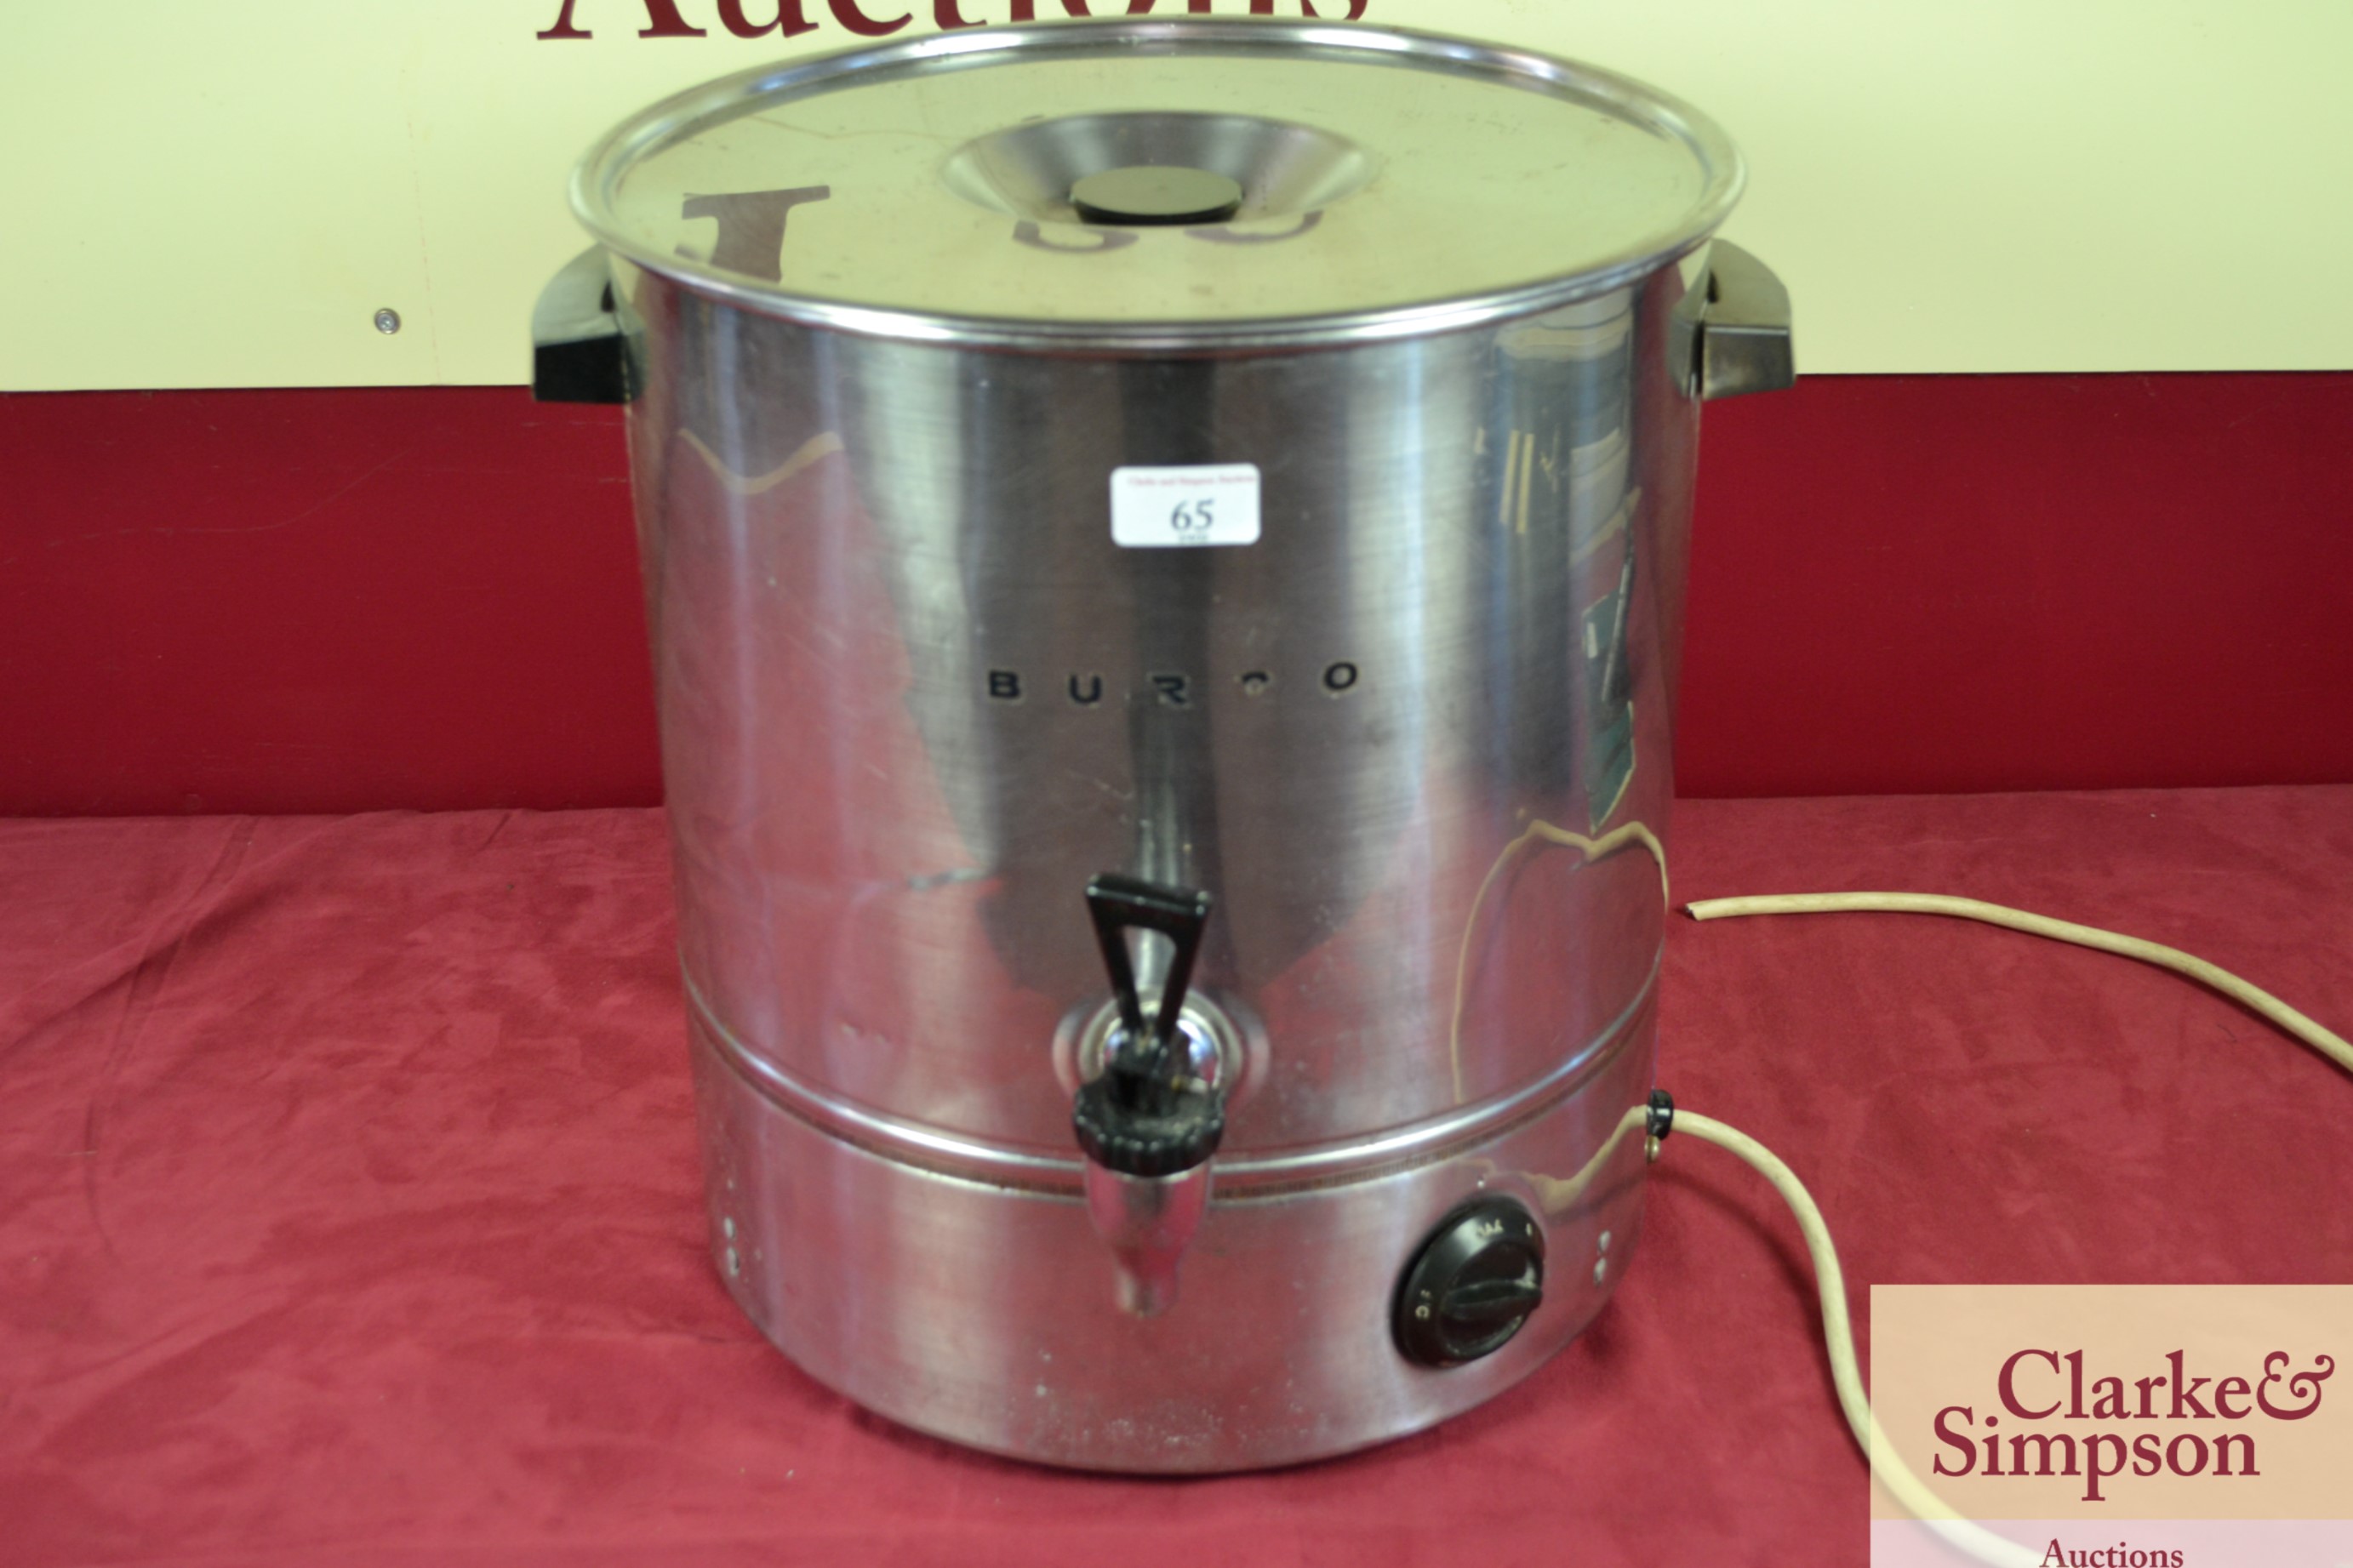 Sheila's Small Hot Water Urn with certificate of authenticity Autographed by Mackenzie Crook